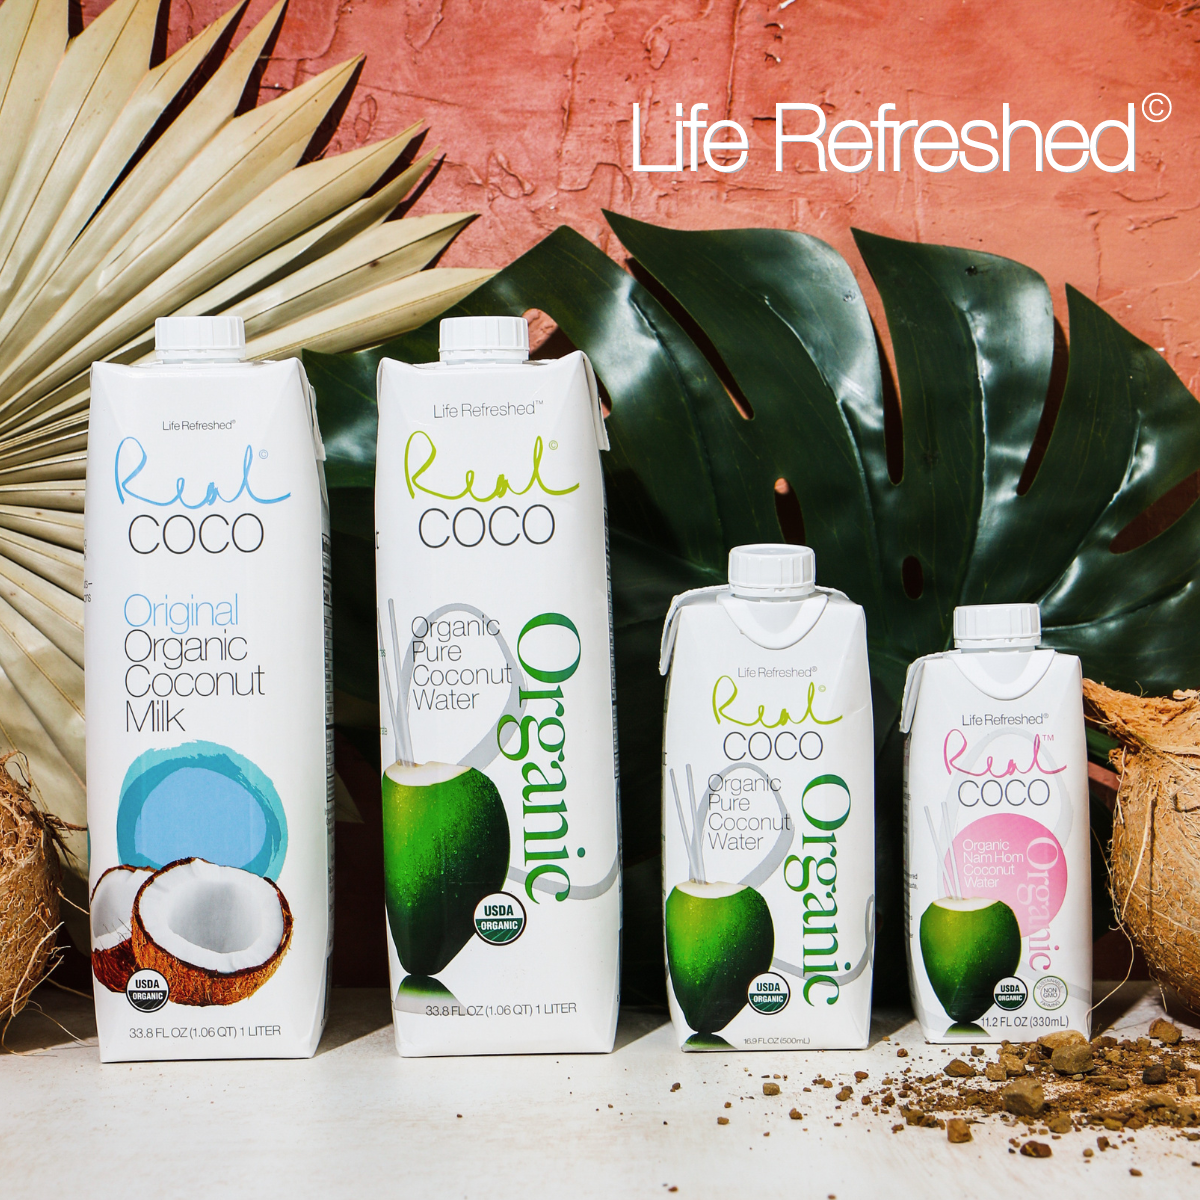 Life Refreshed Brands Real© Coco - Organic Coconut Products